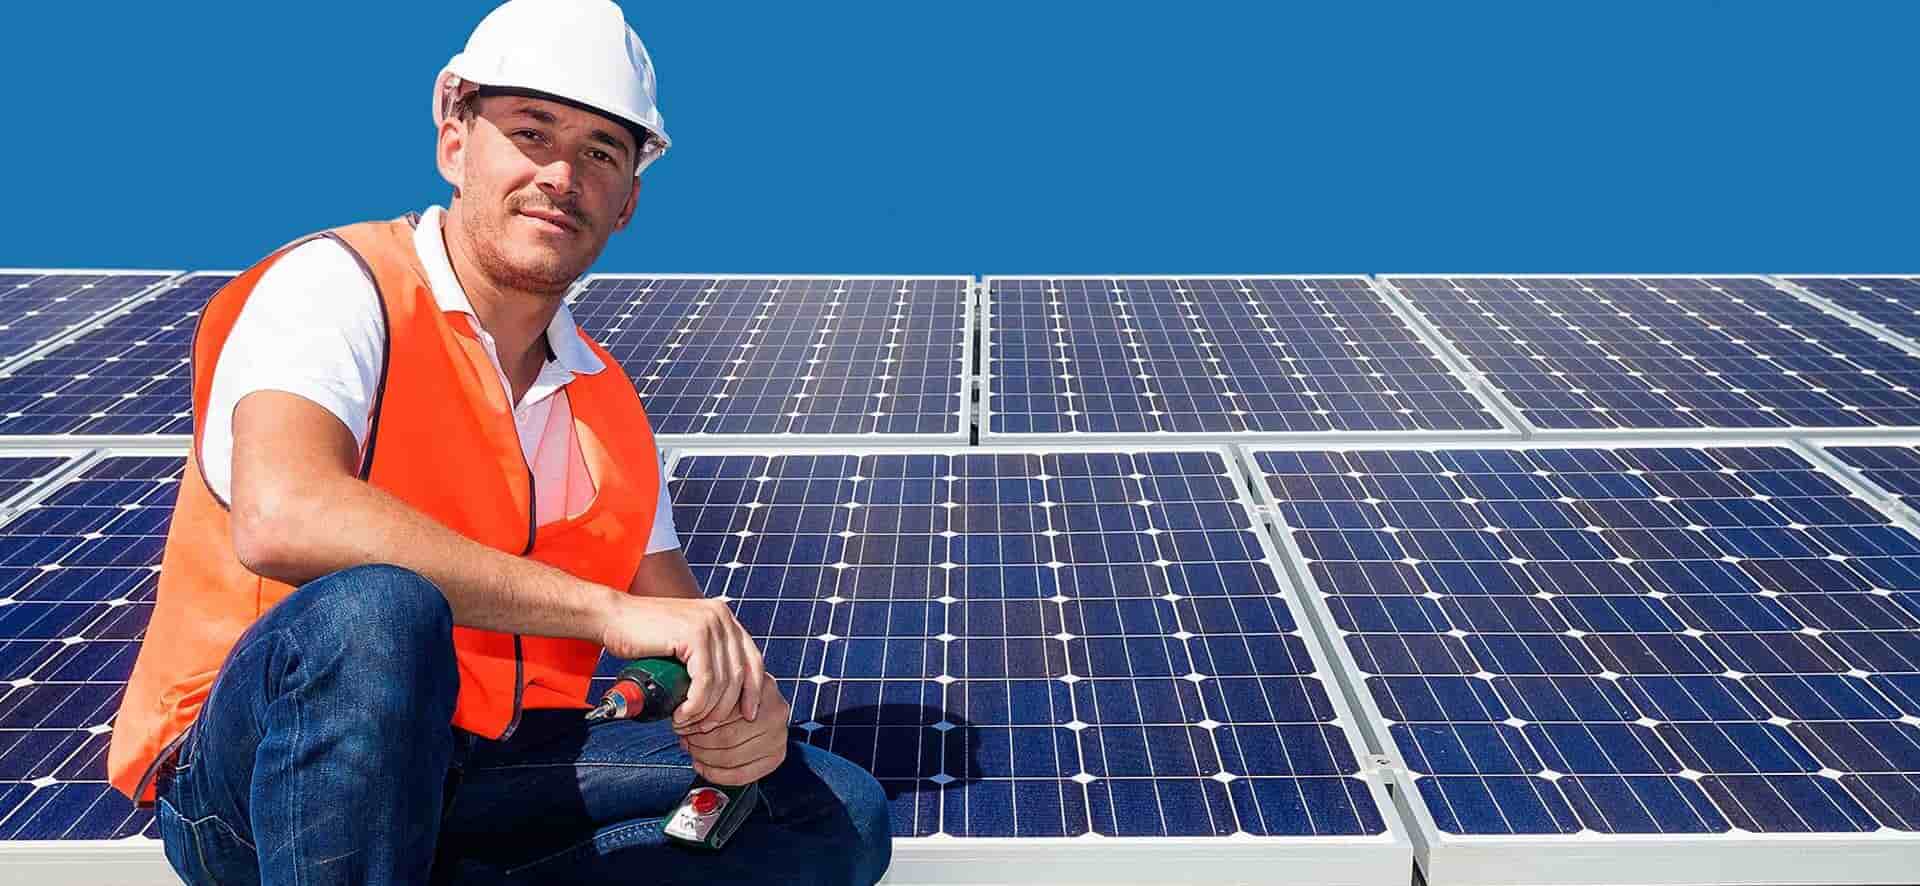 What are the Benefits of Building Solar Panels?